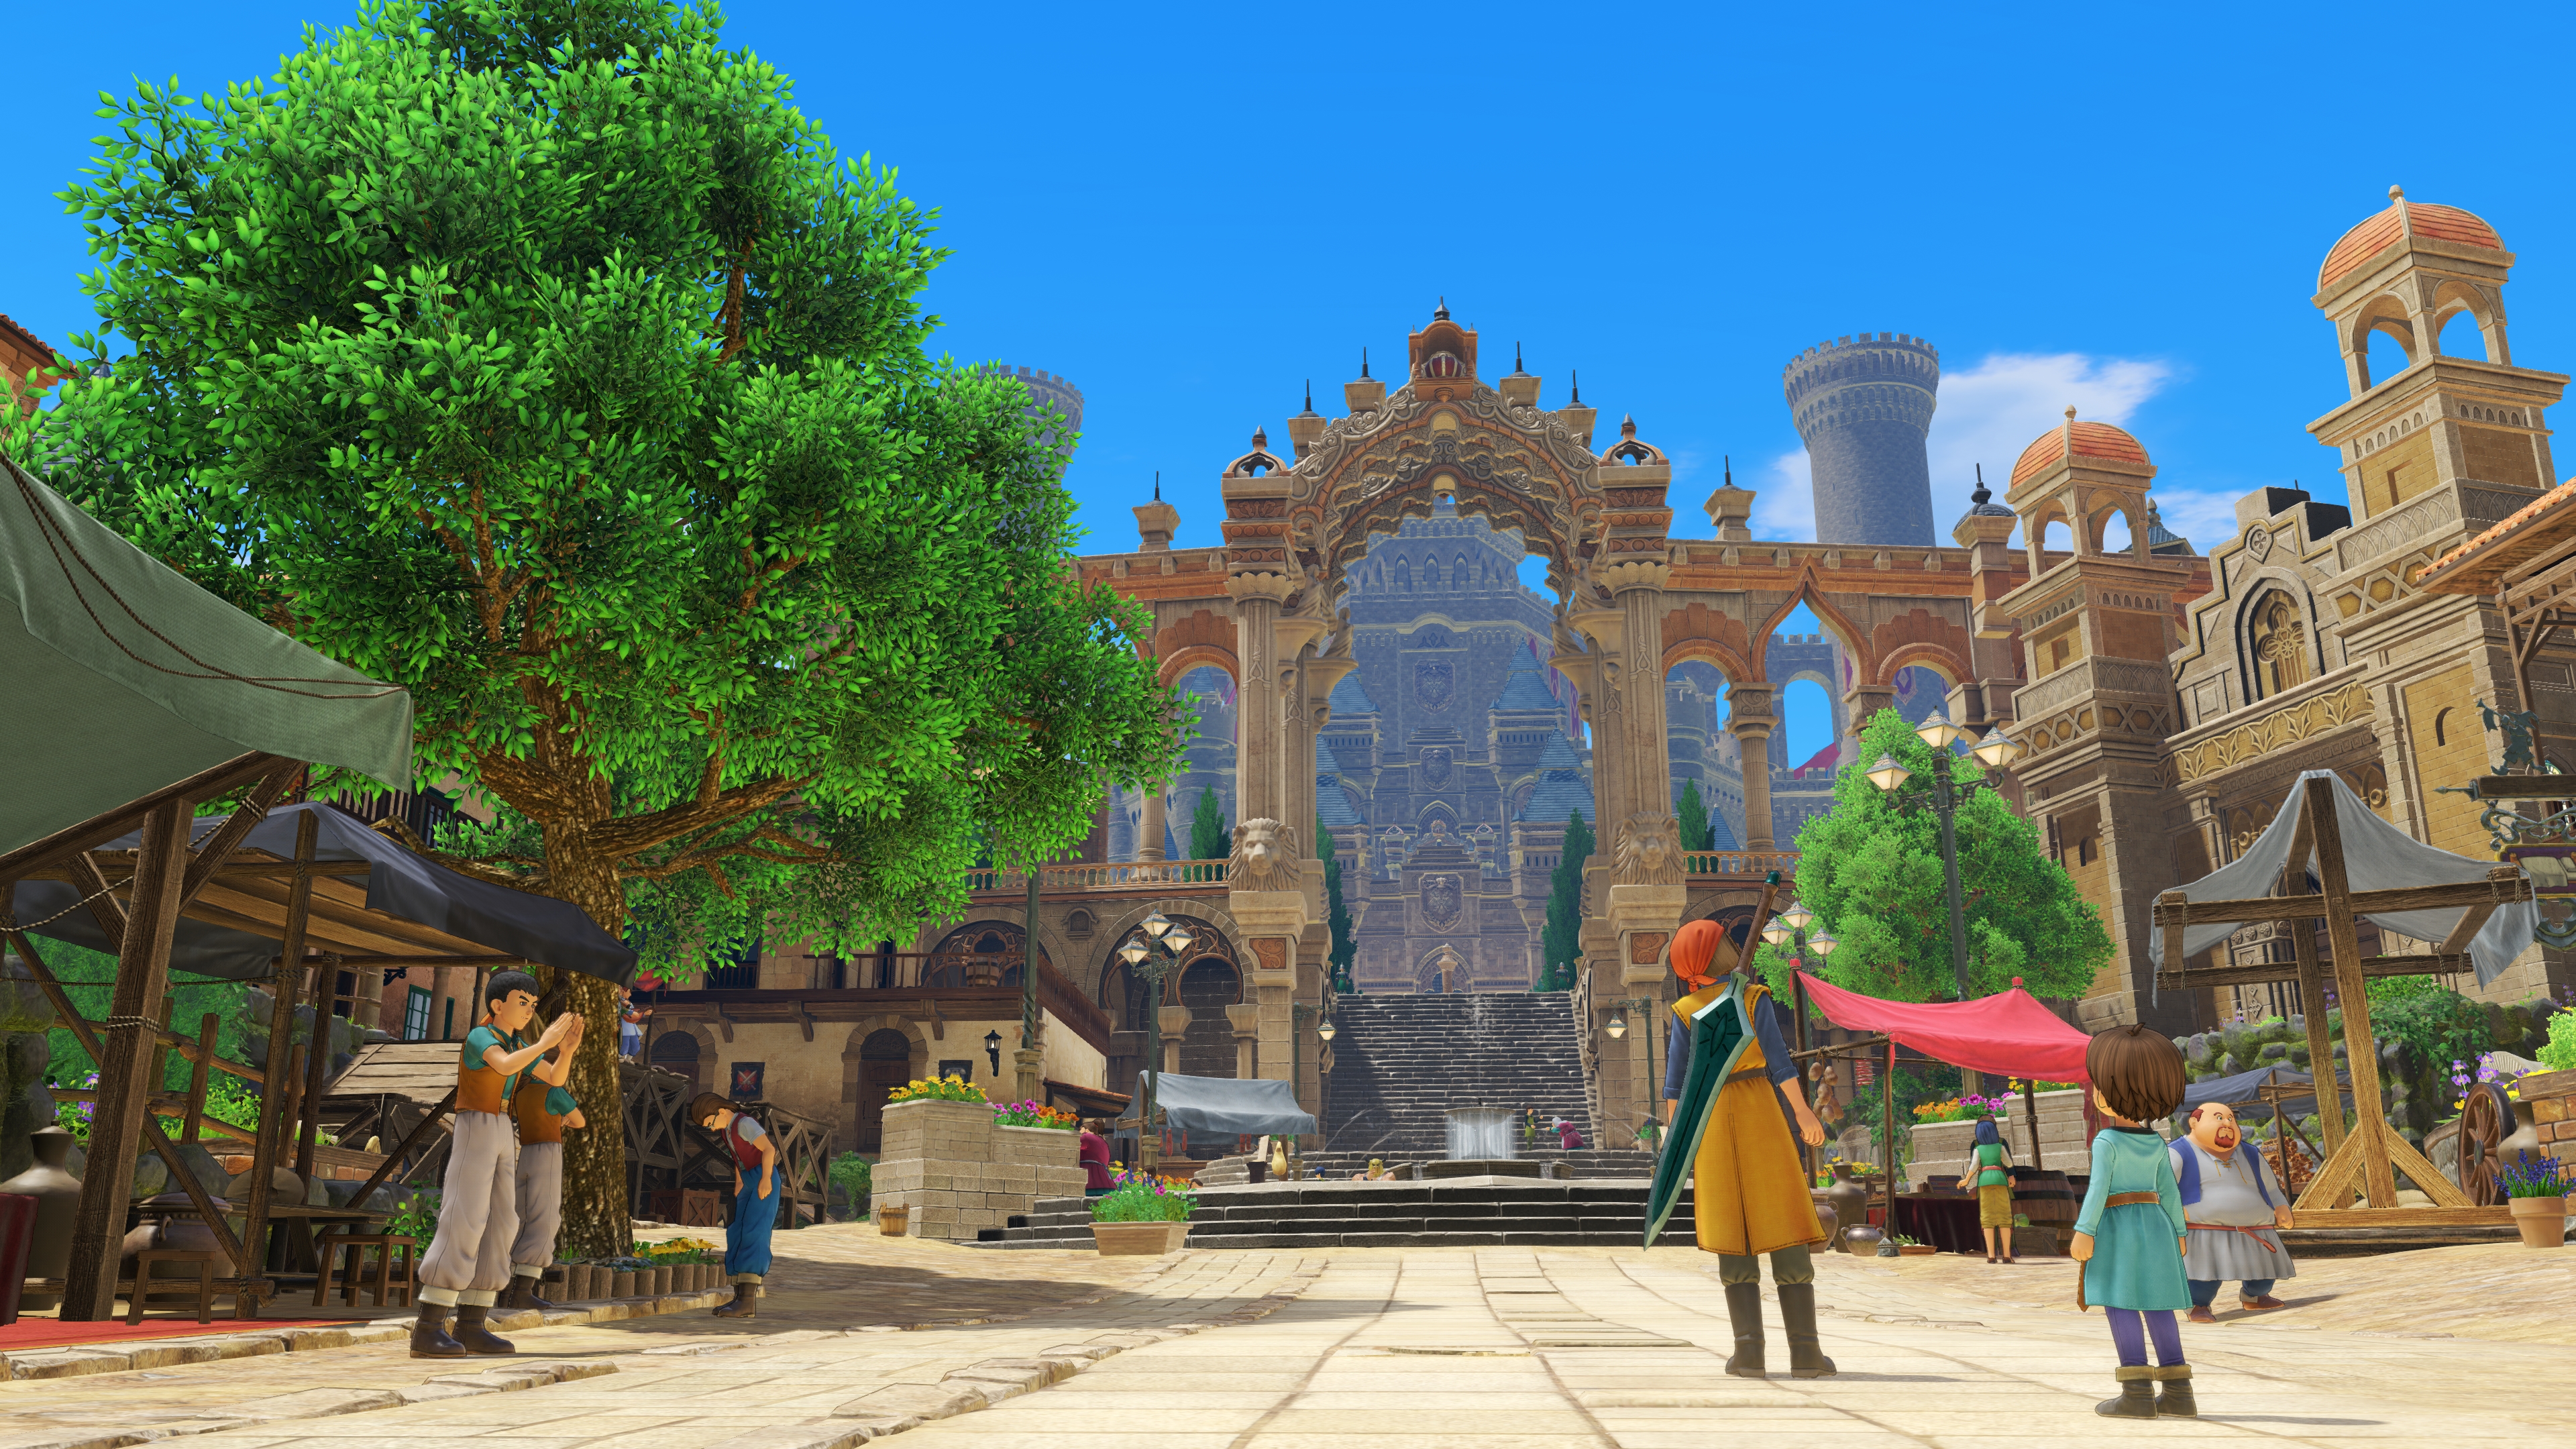 General 3840x2160 Dragon Quest XI: Echoes of an Elusive Age screen shot video games Dragon Quest